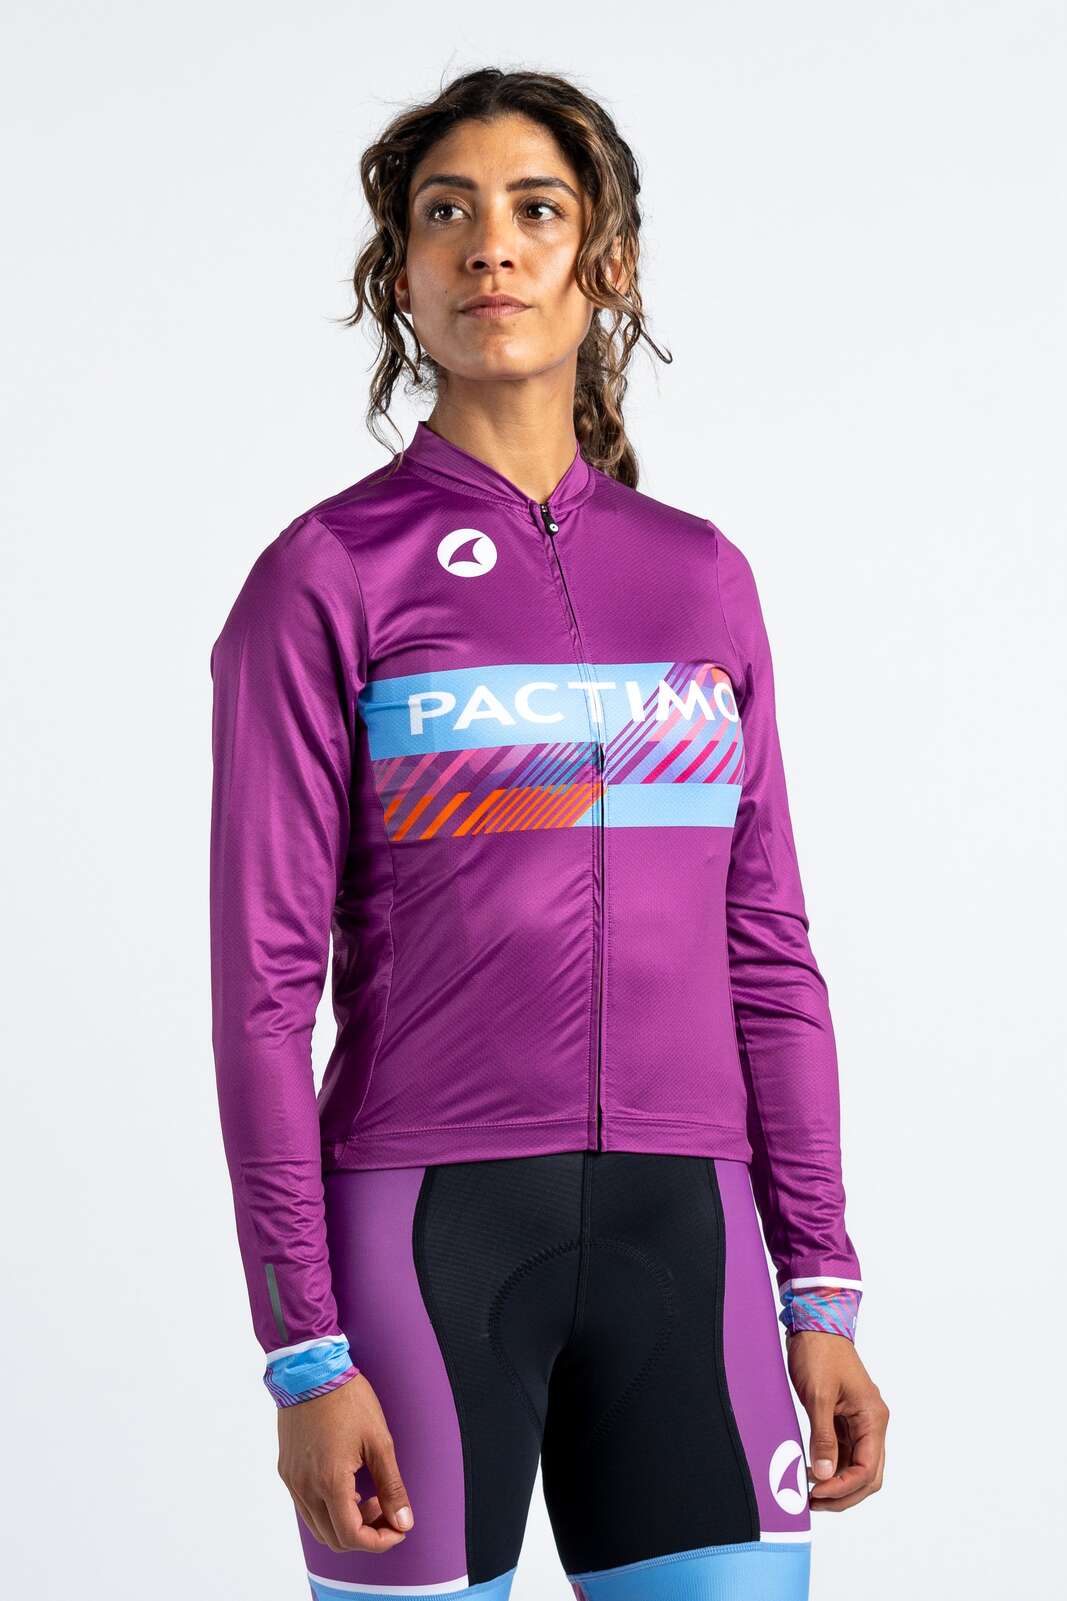 Women's Custom Long-Sleeve Cycling Jersey - Ascent Front View #fit_traditional